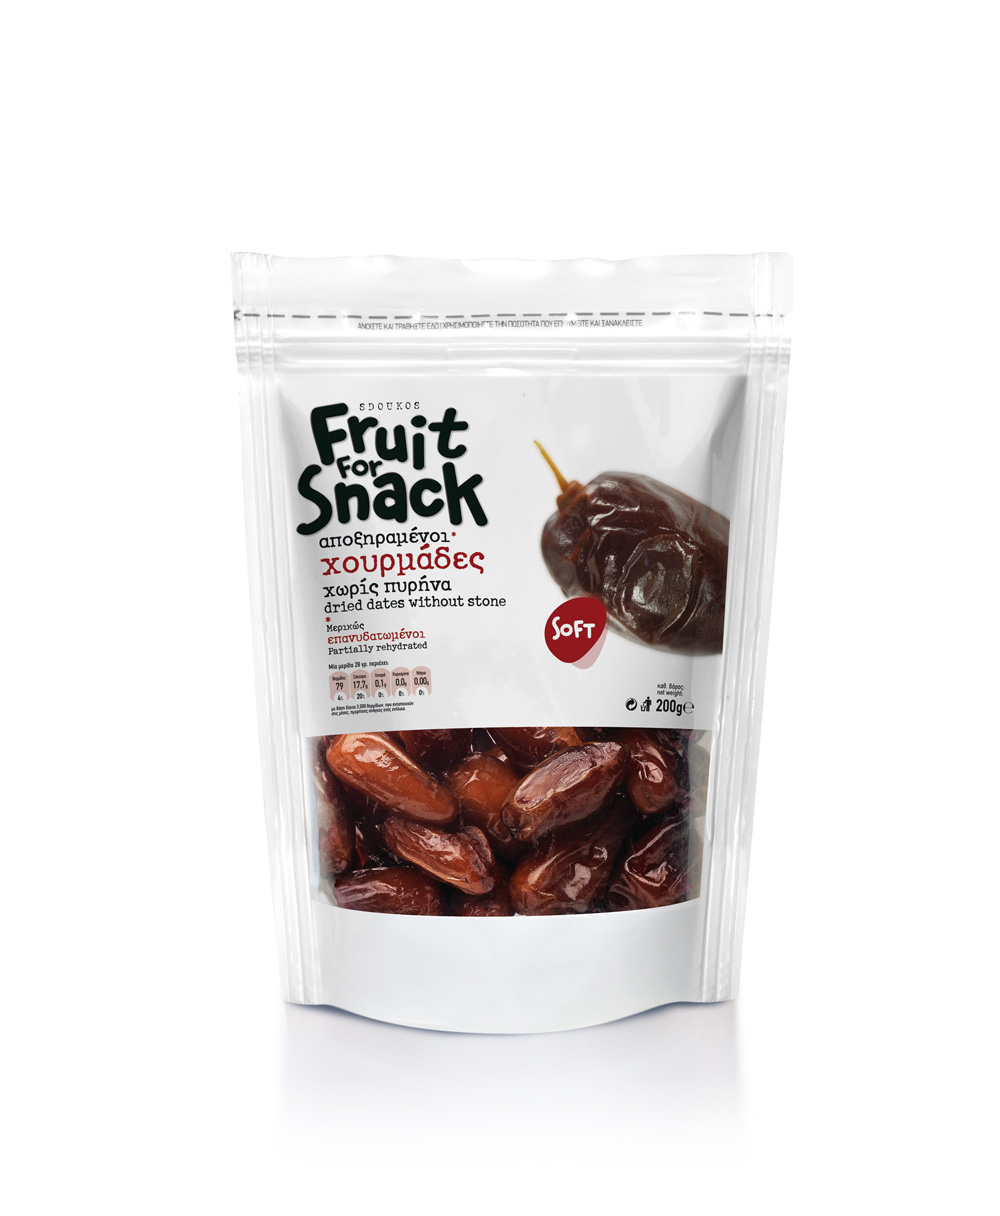 DRIED DATES PARTIALLY REHYDRATED “FRUIT FOR SNACK” 200g